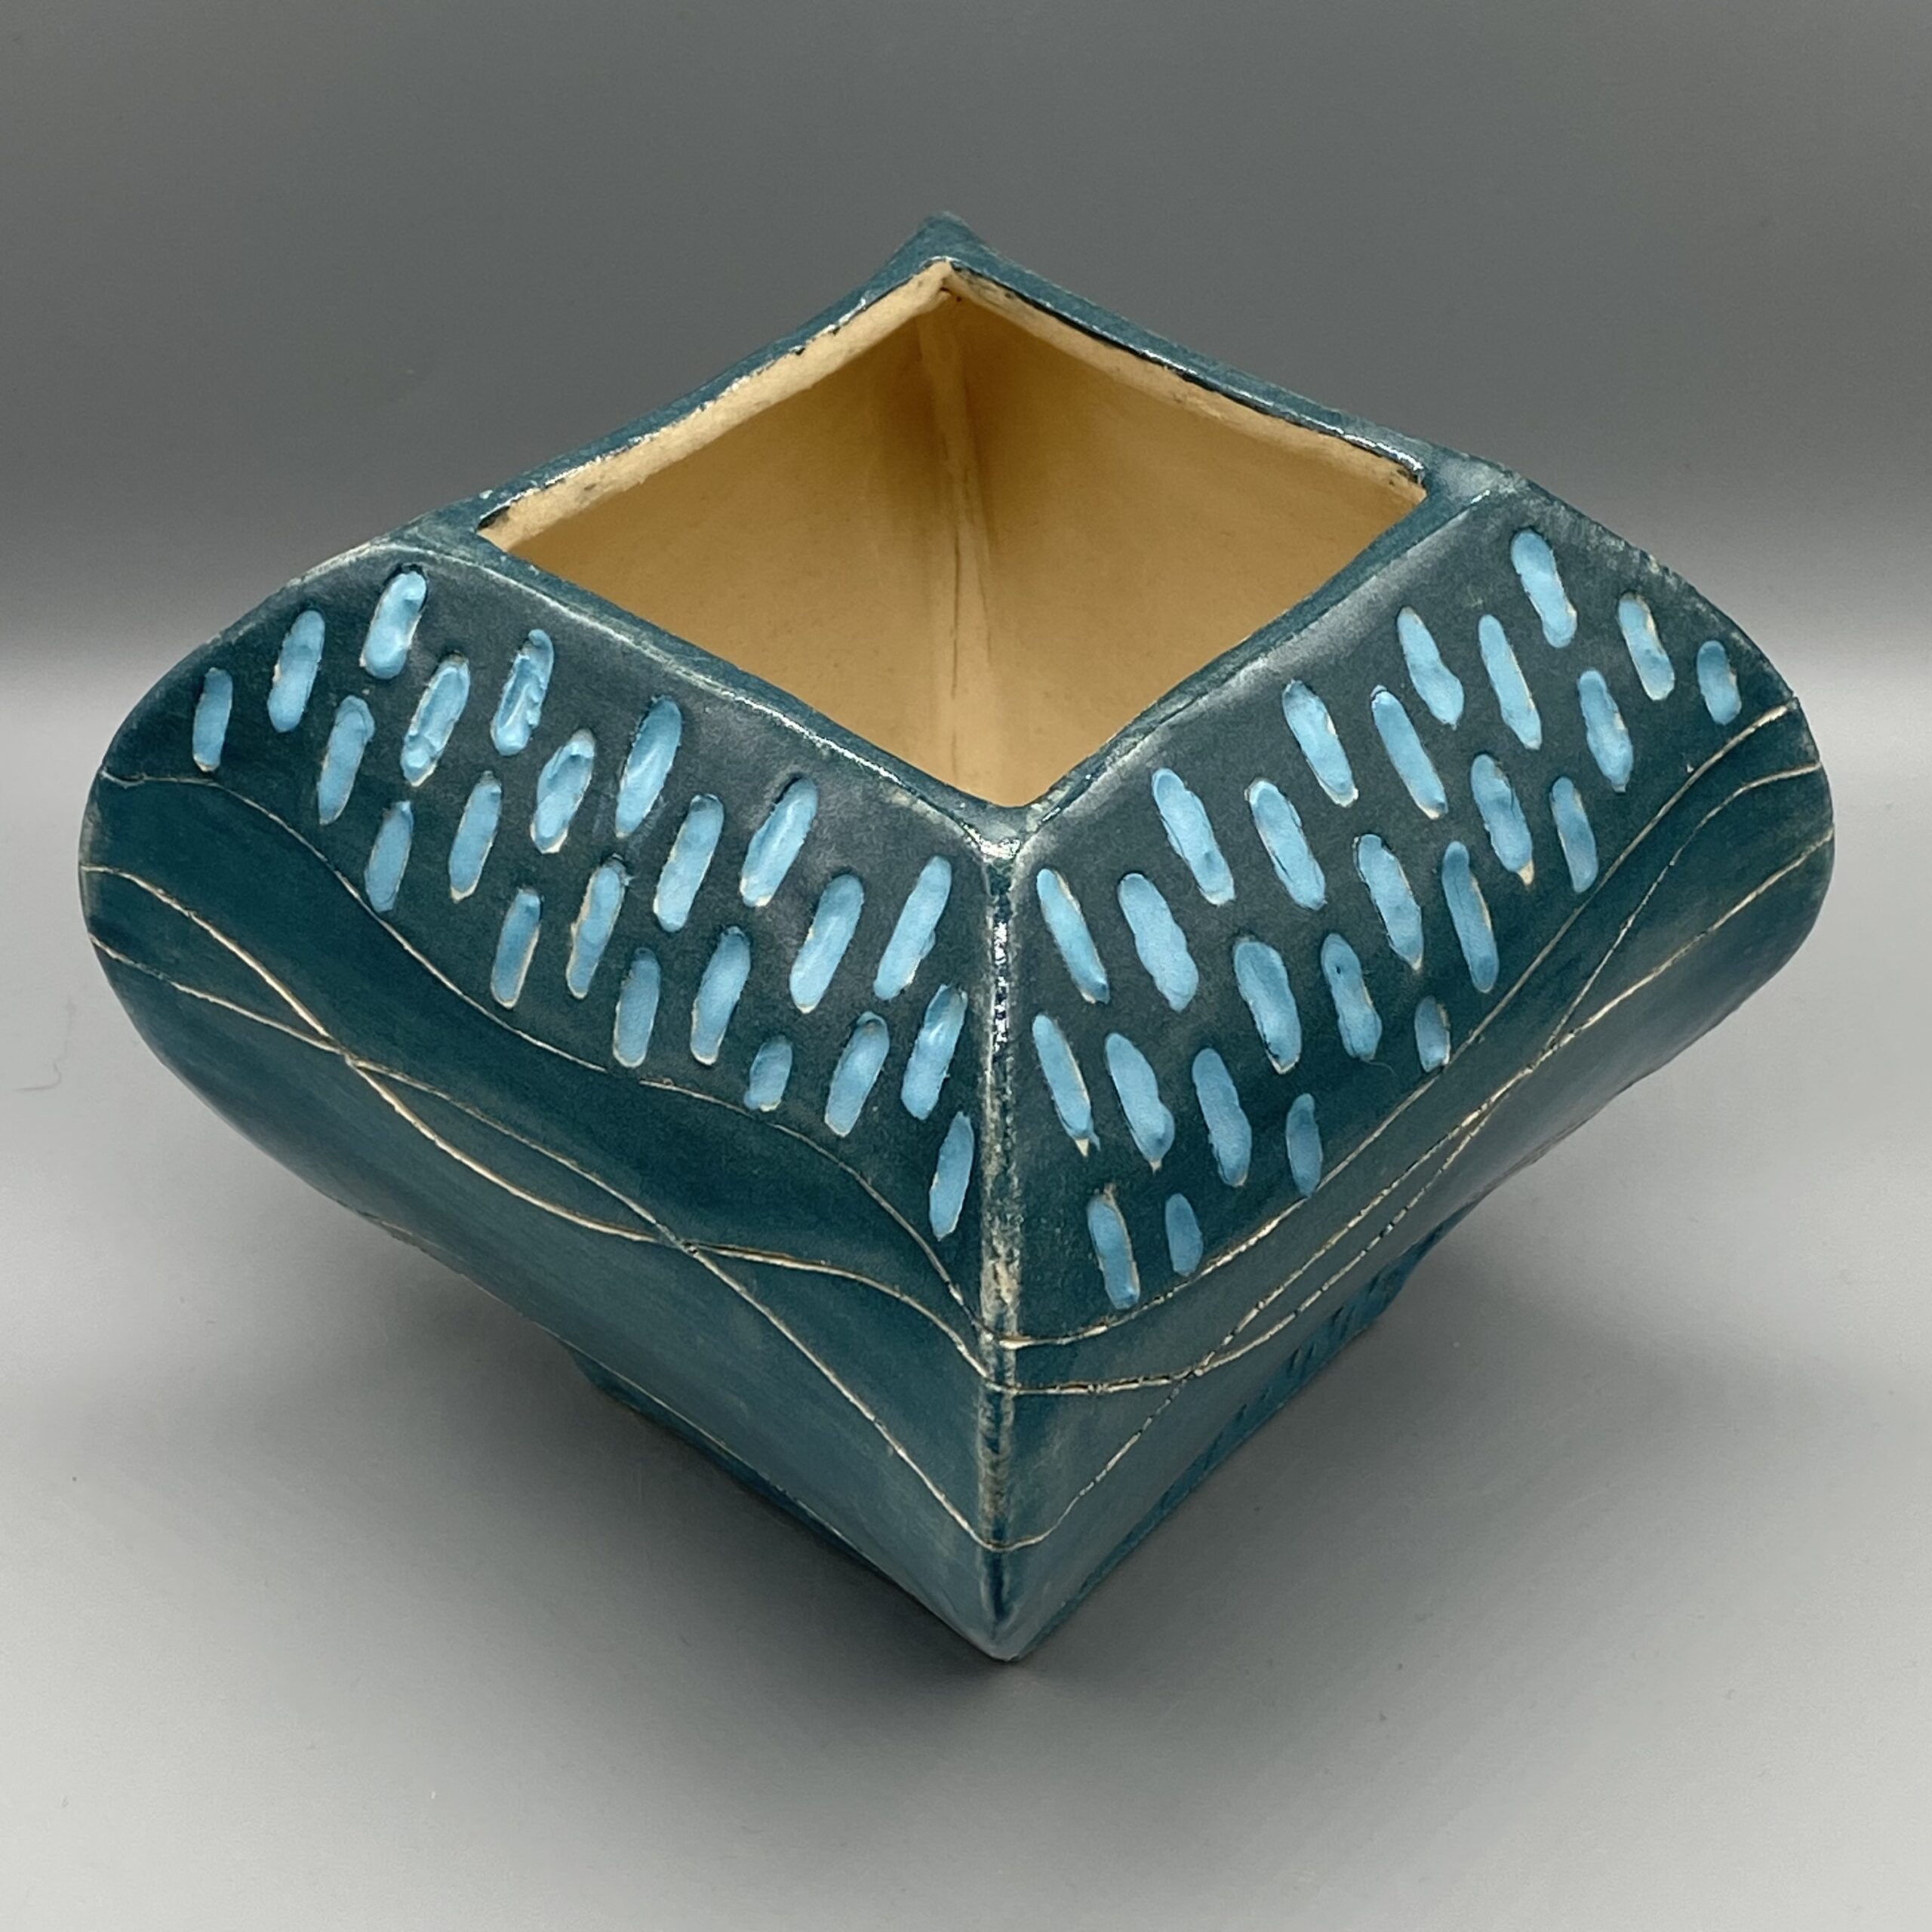 Featured image for “Wind & Sea vase”